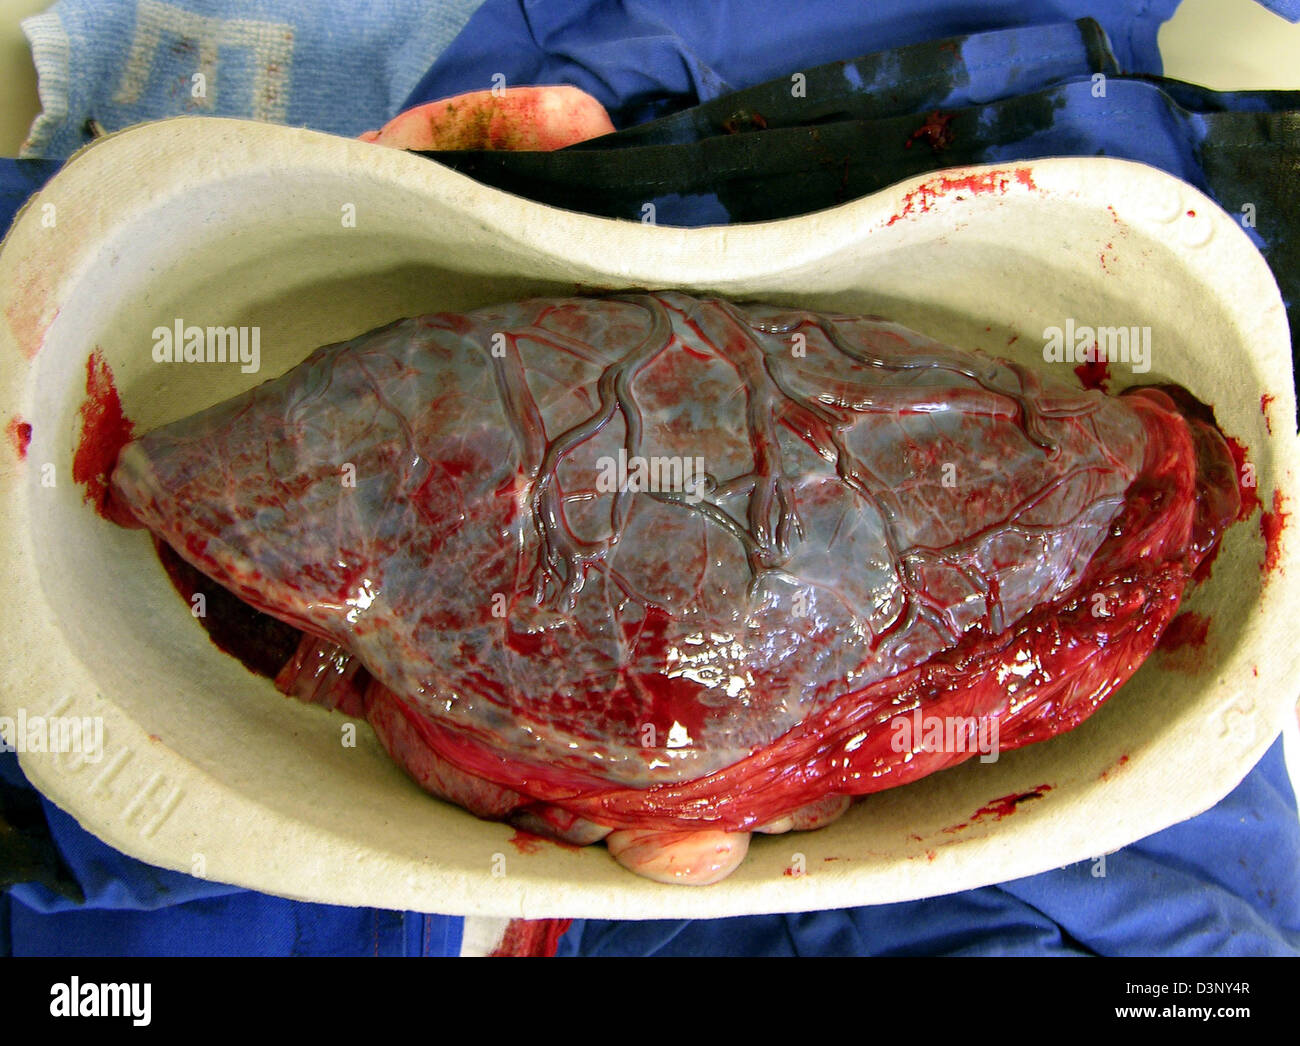 The afterbirth, placenta, photographed in a kidney dish at a hospital in Esslingen, Germany, 11 May 2004. Photo: Juergen Effner Stock Photo